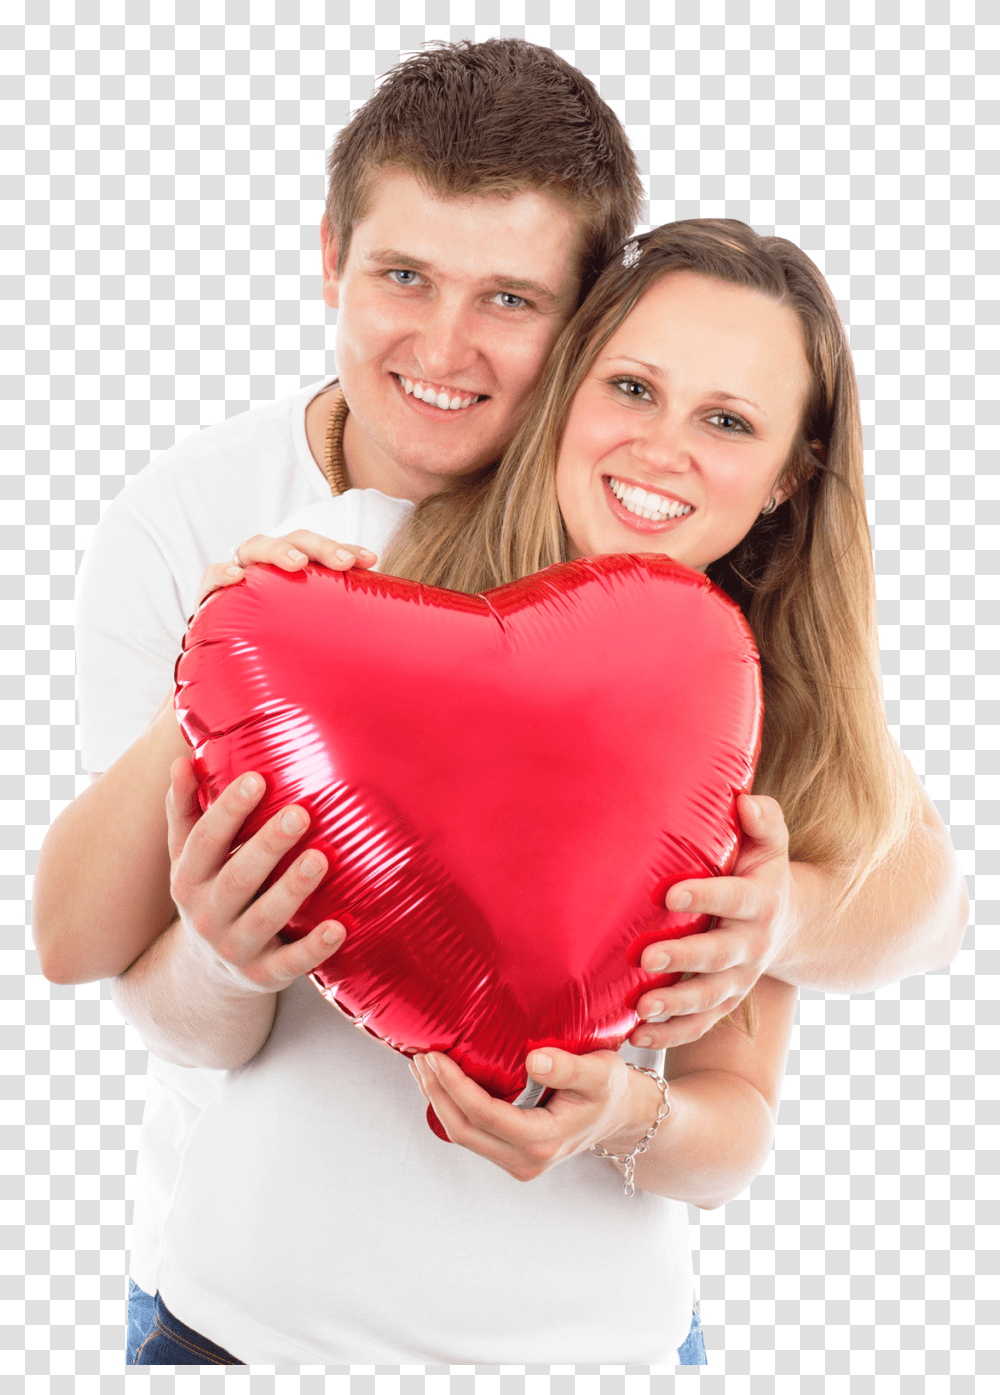 Young Couple Holding A Red Heart Pillow Image Pngpix Couple In Love, Person, Human, Clothing, Cushion Transparent Png